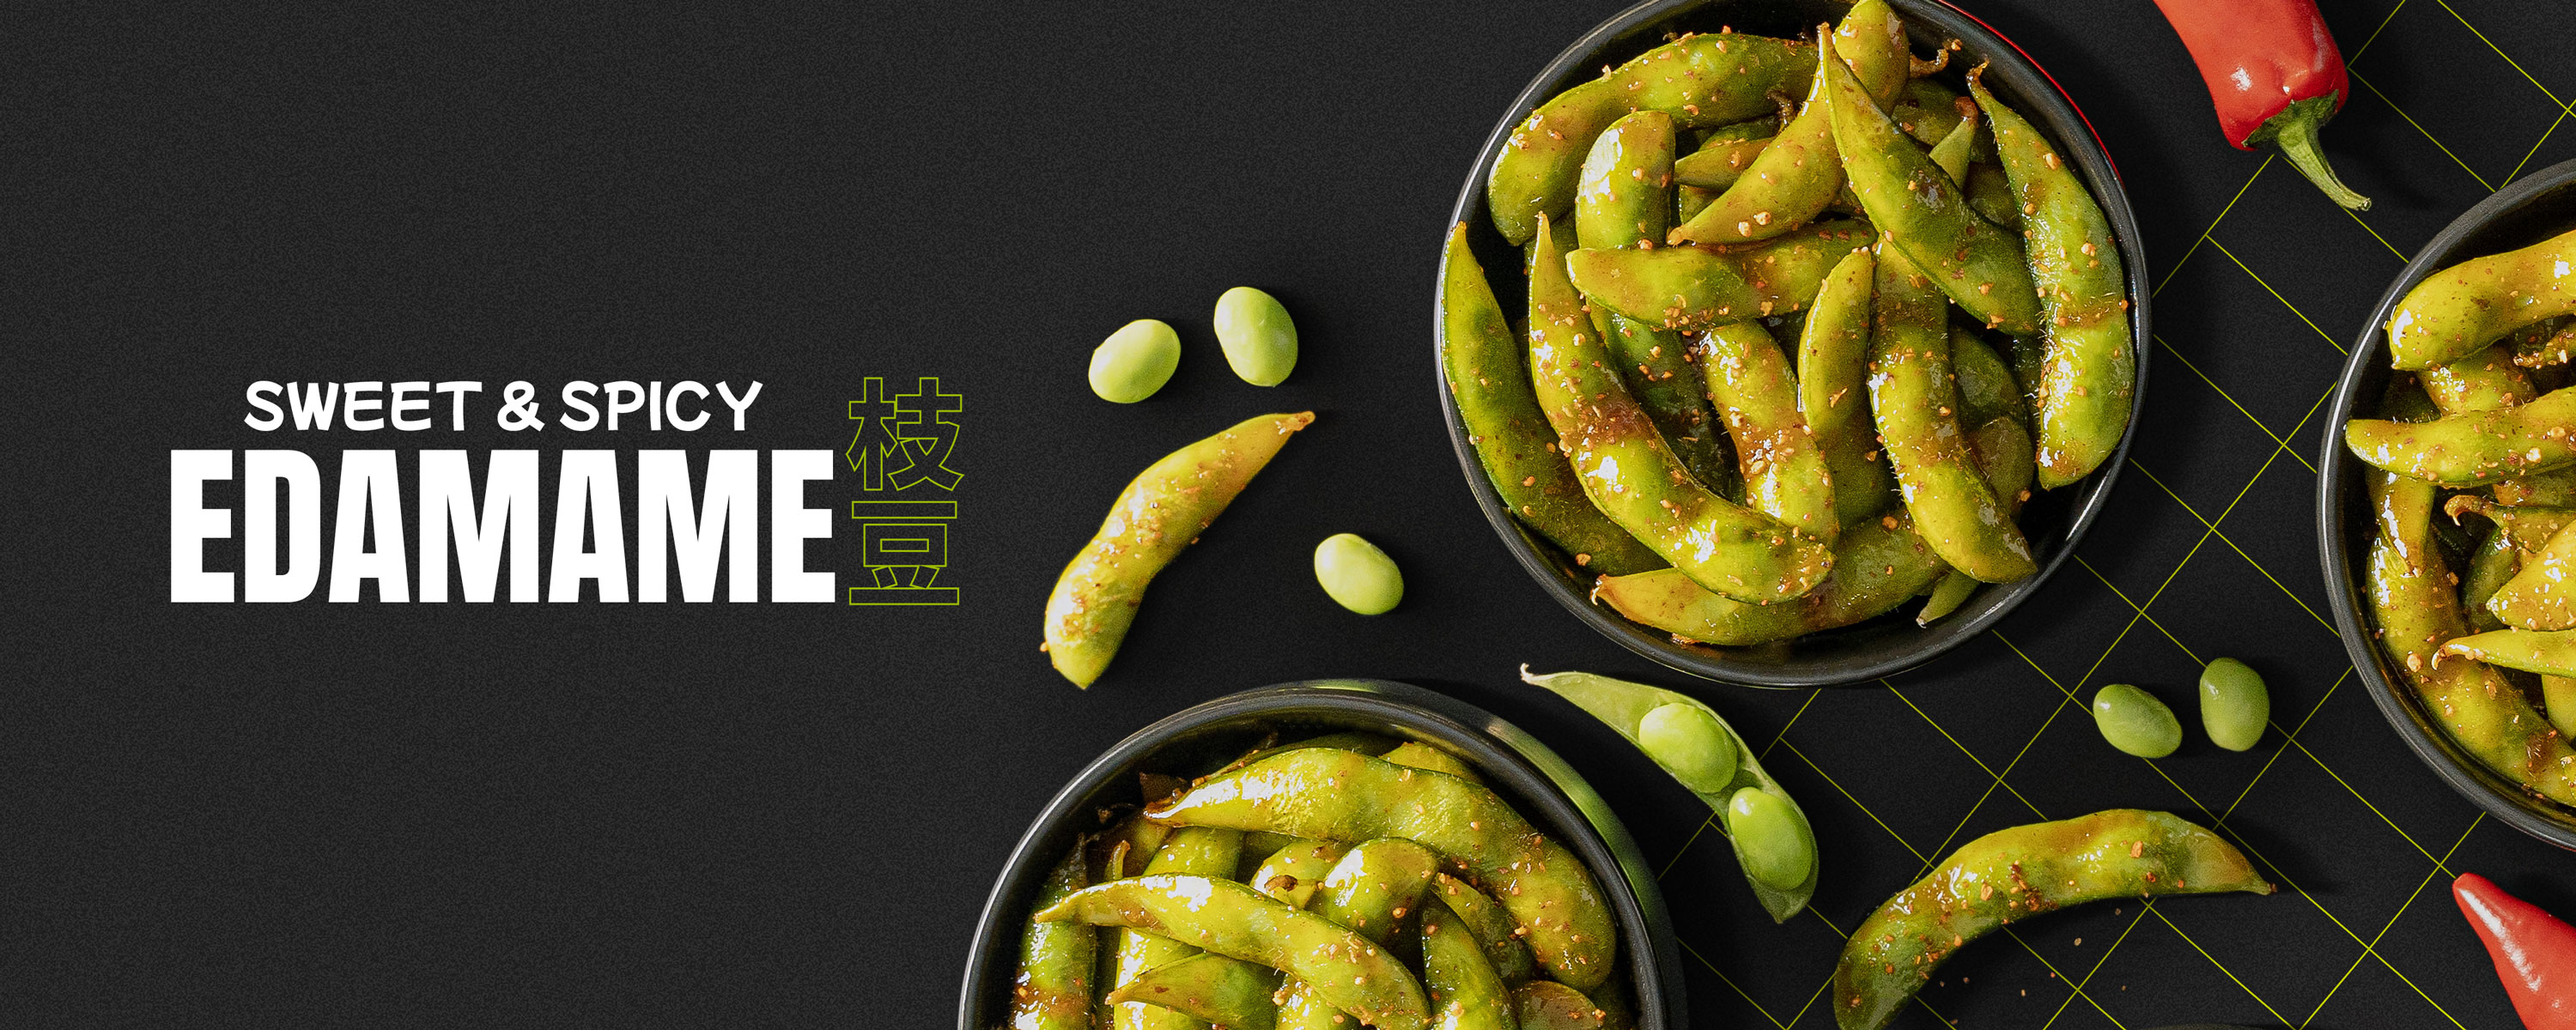 SPICY AND SWEET EDAMAME